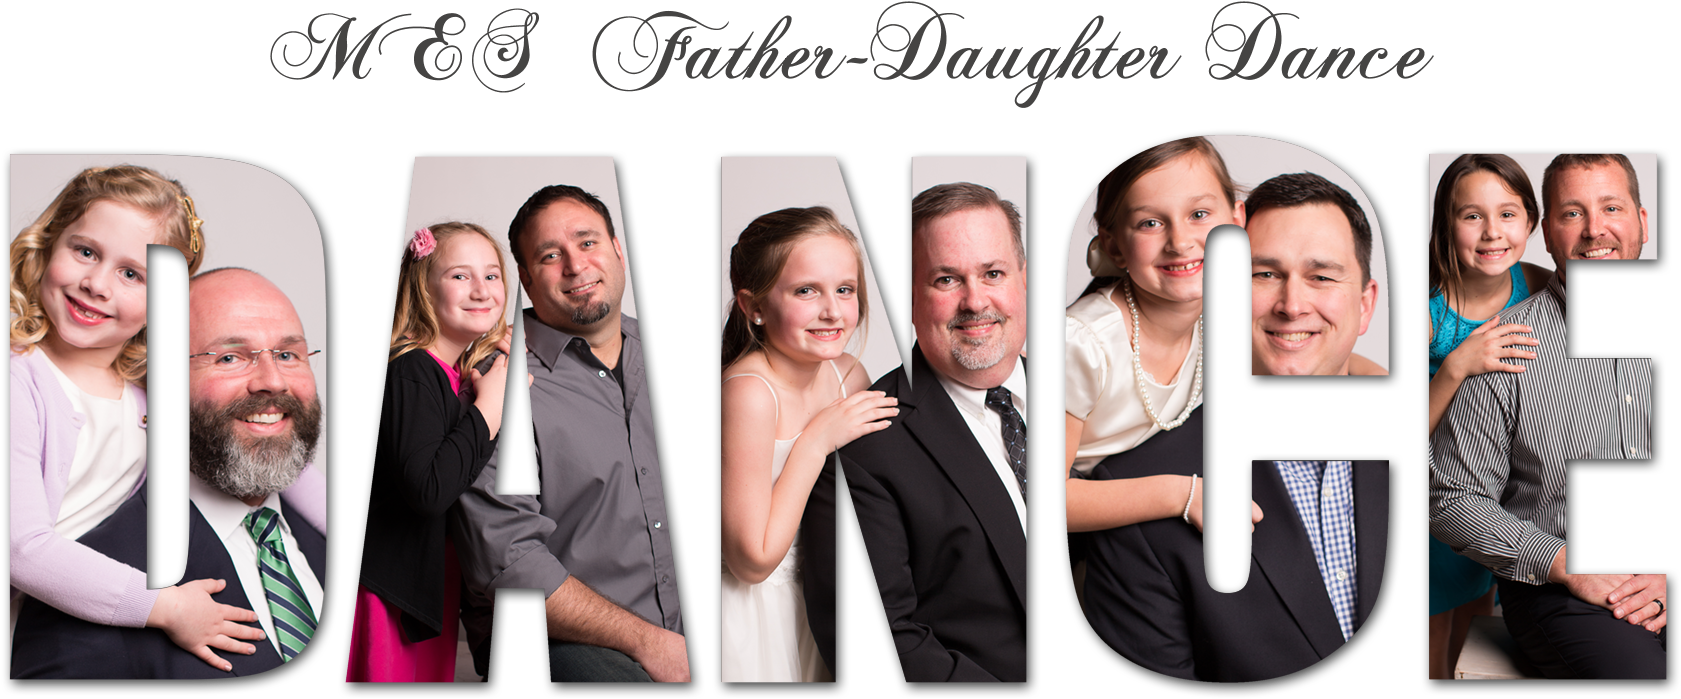 Father Daughter Dance Event